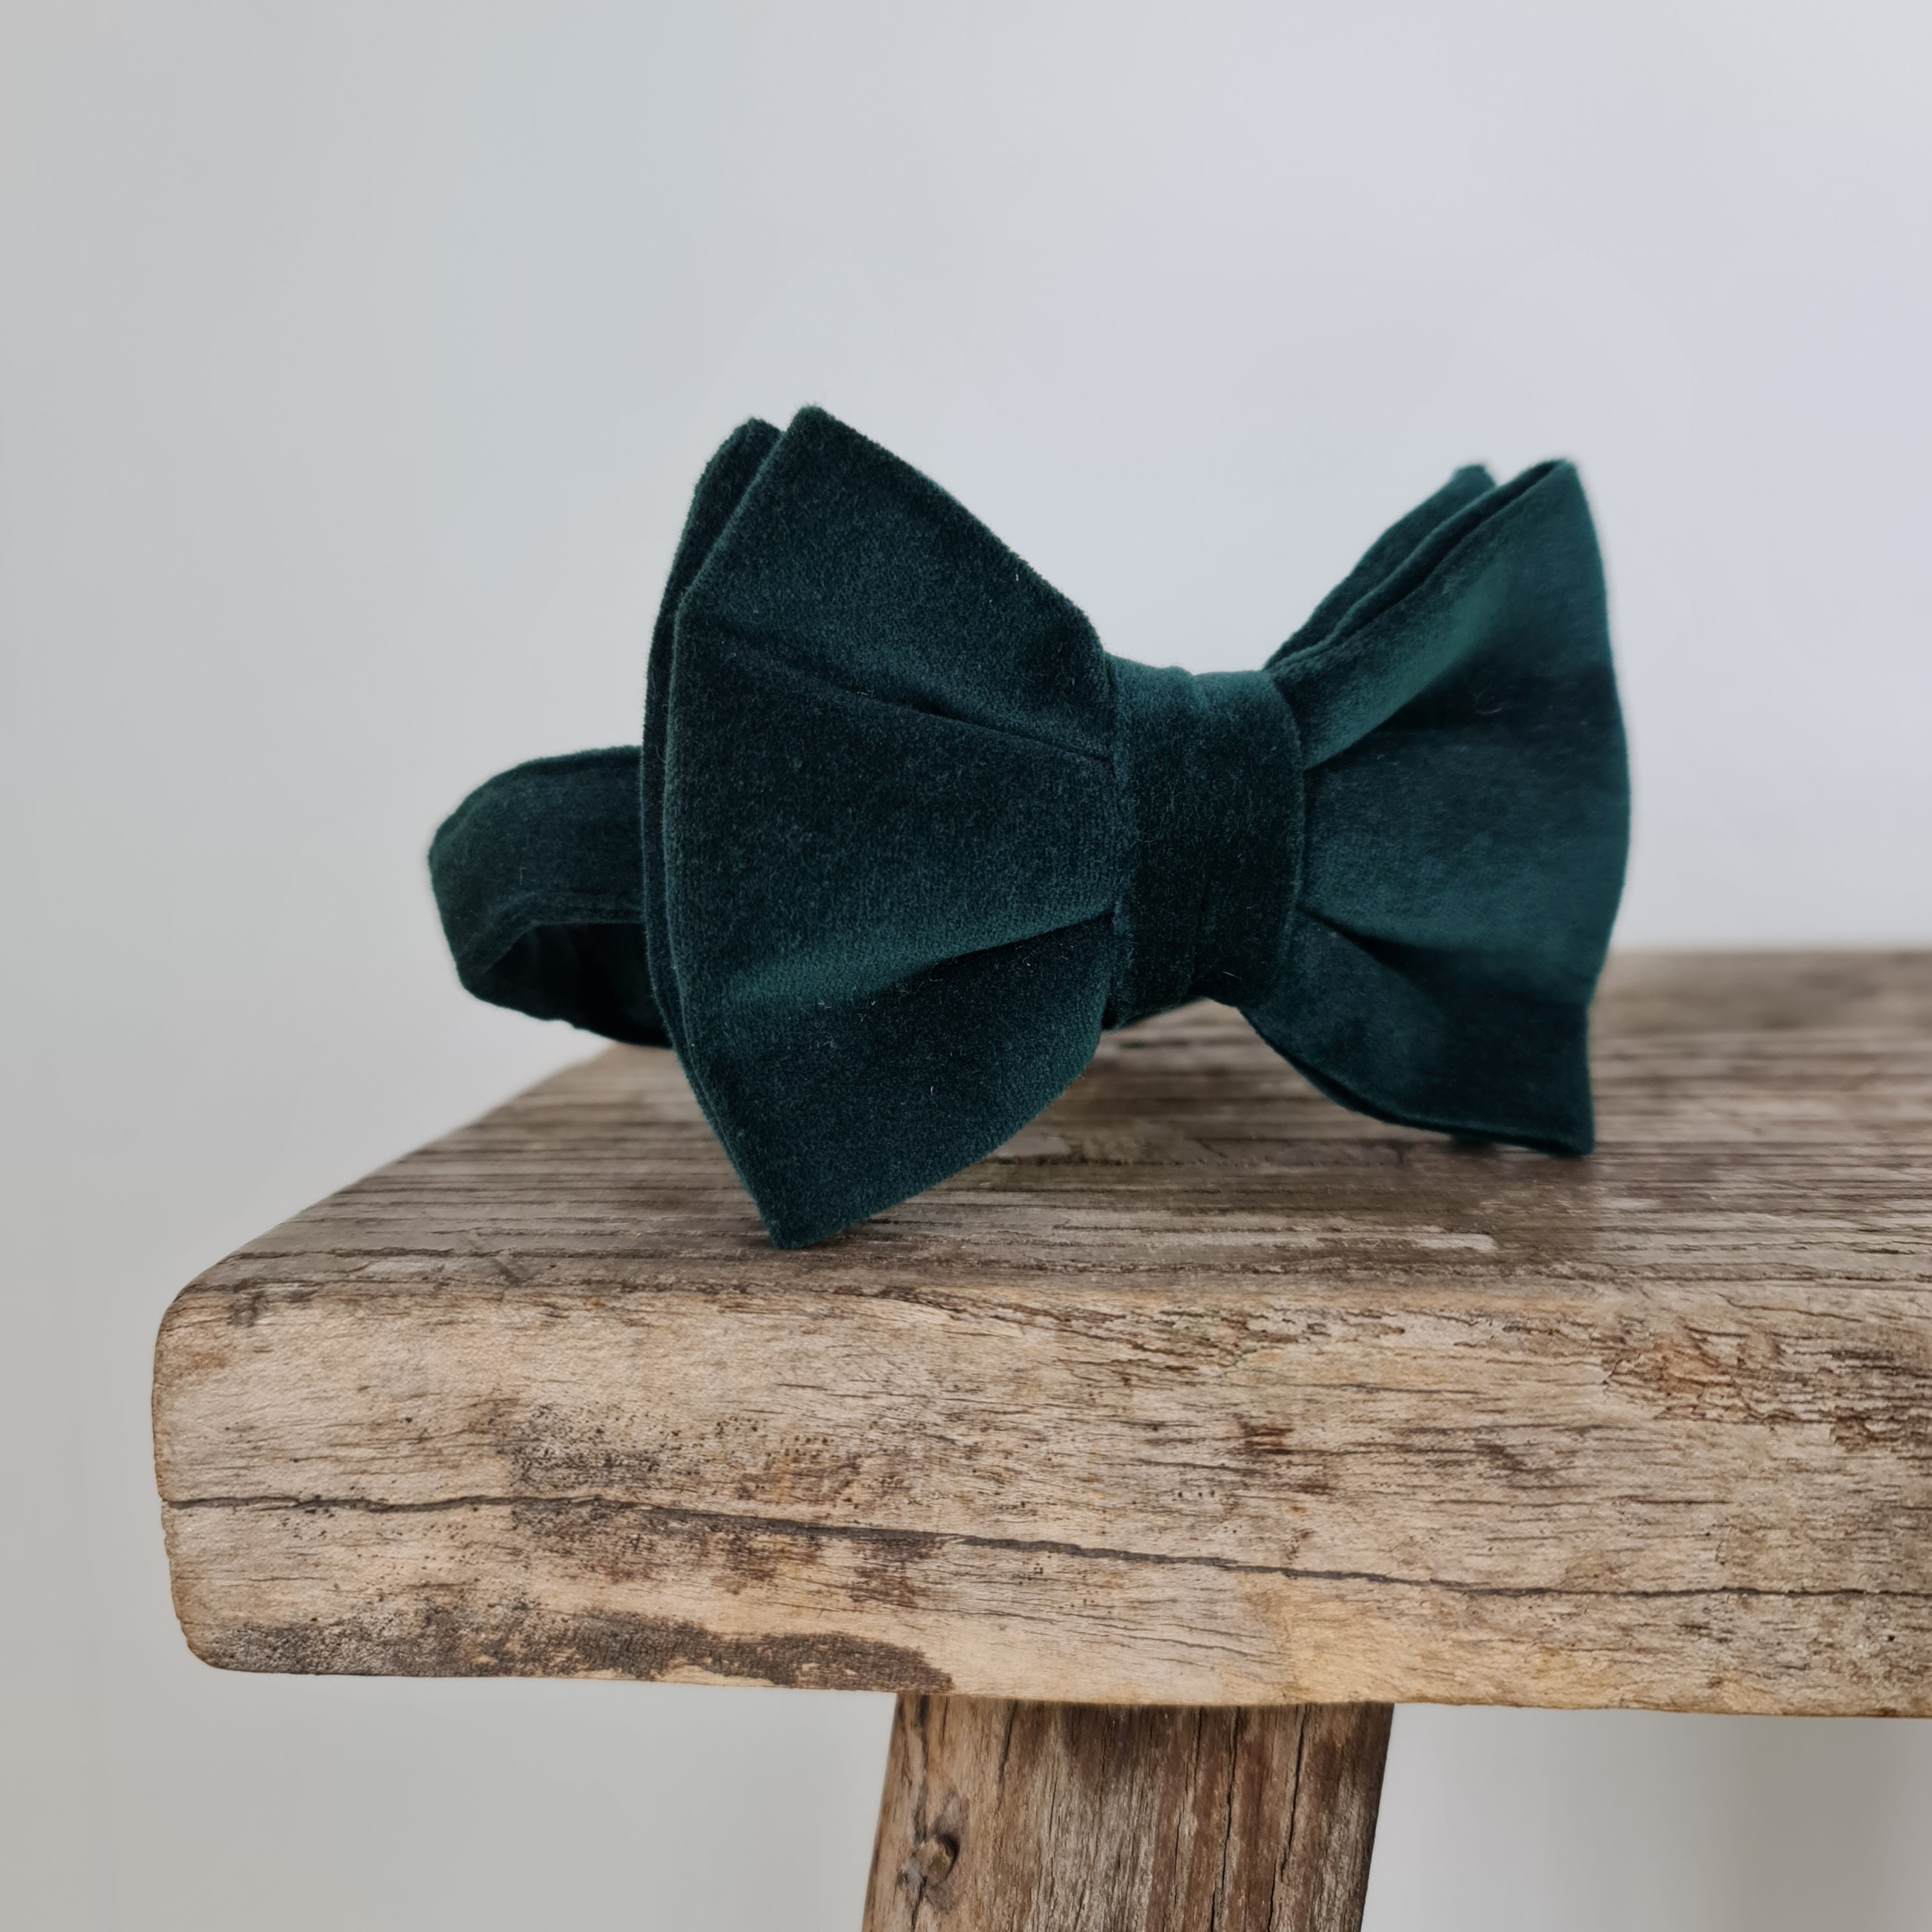 DIY: How to Tie a Loopy Bow - Save-On-Crafts